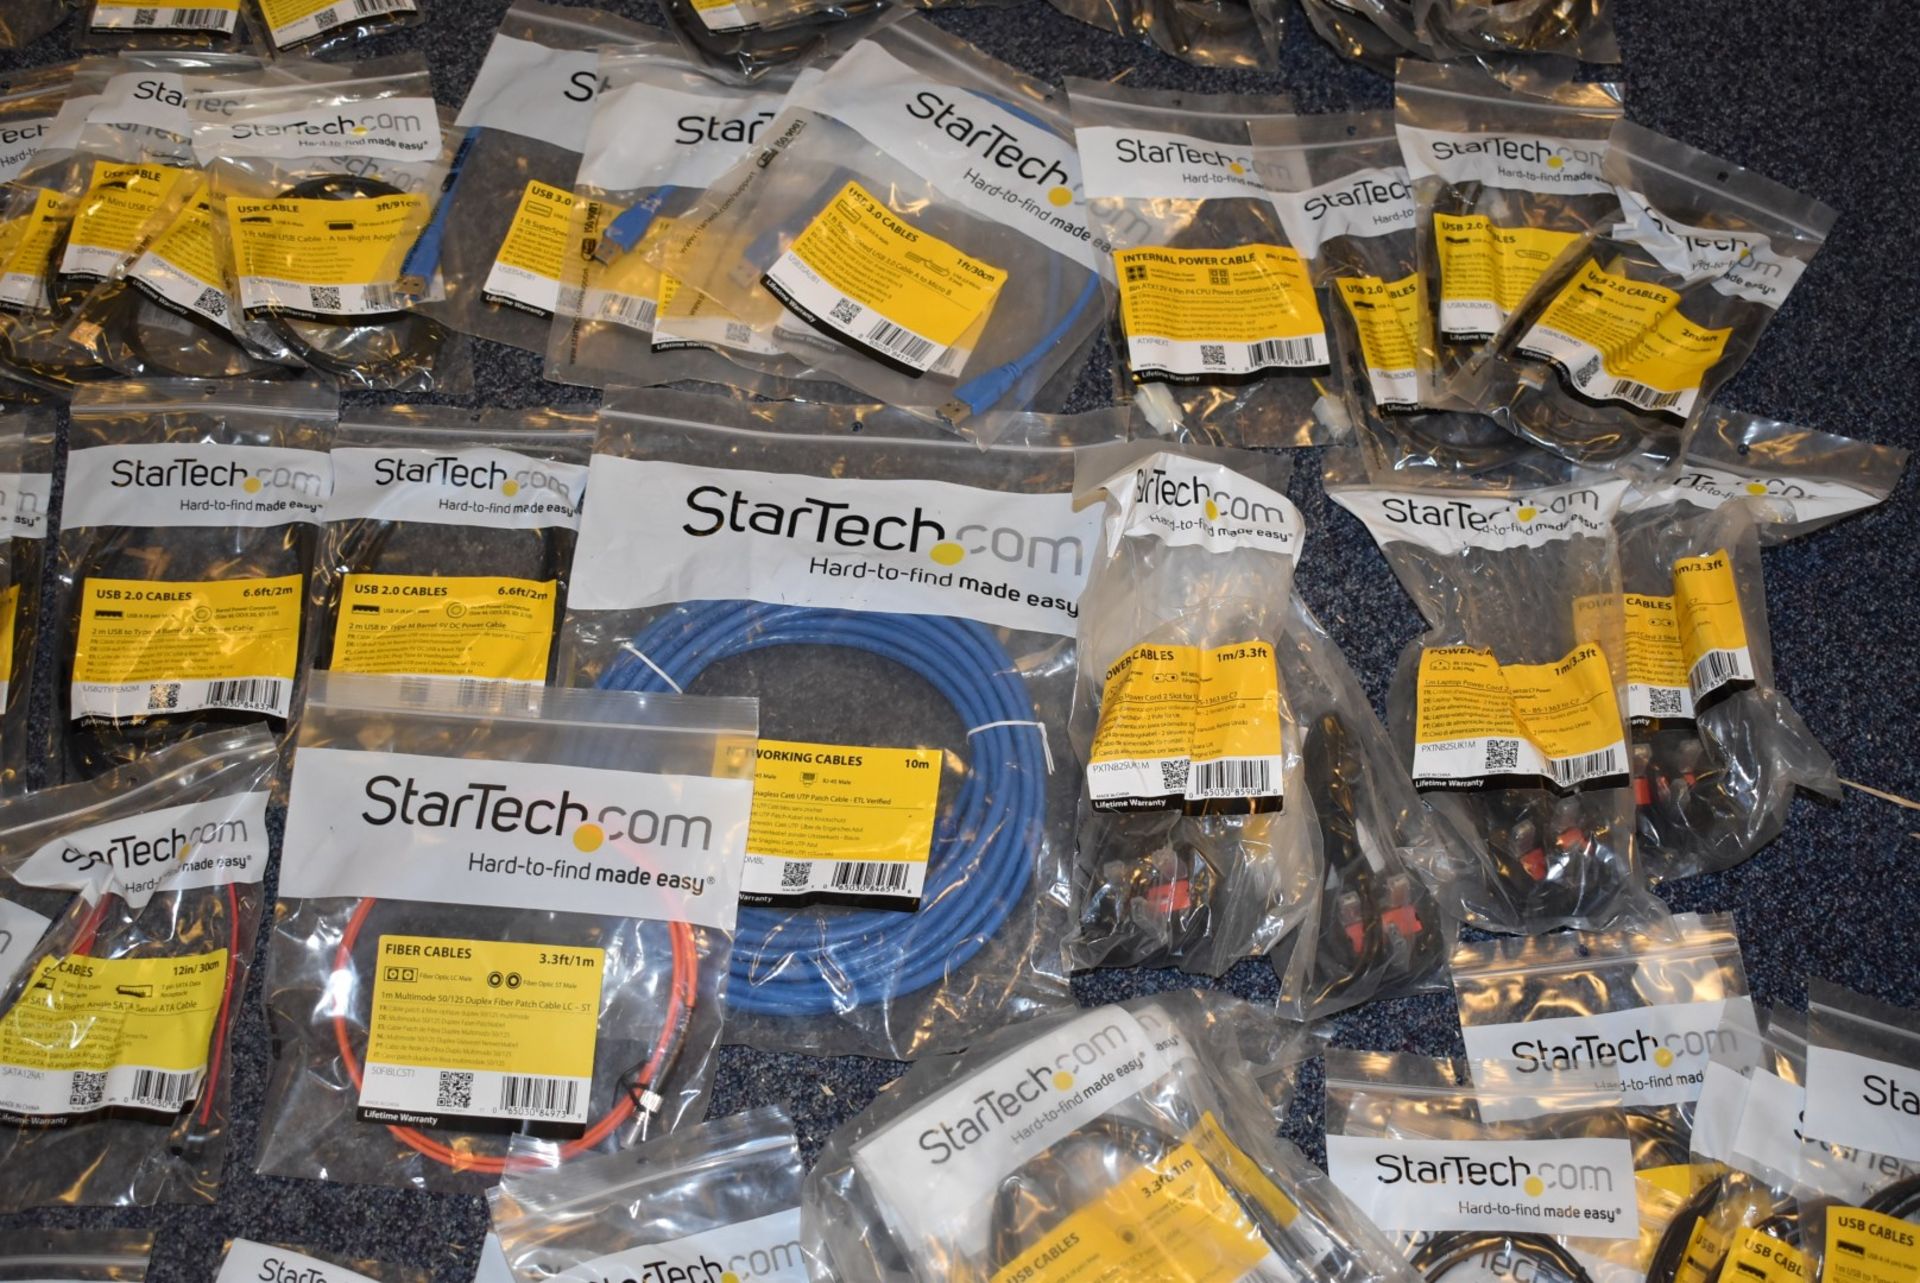 177 x Assorted StarTech Cables - Huge Lot in Original Packing - Various Cables Included - Image 27 of 50